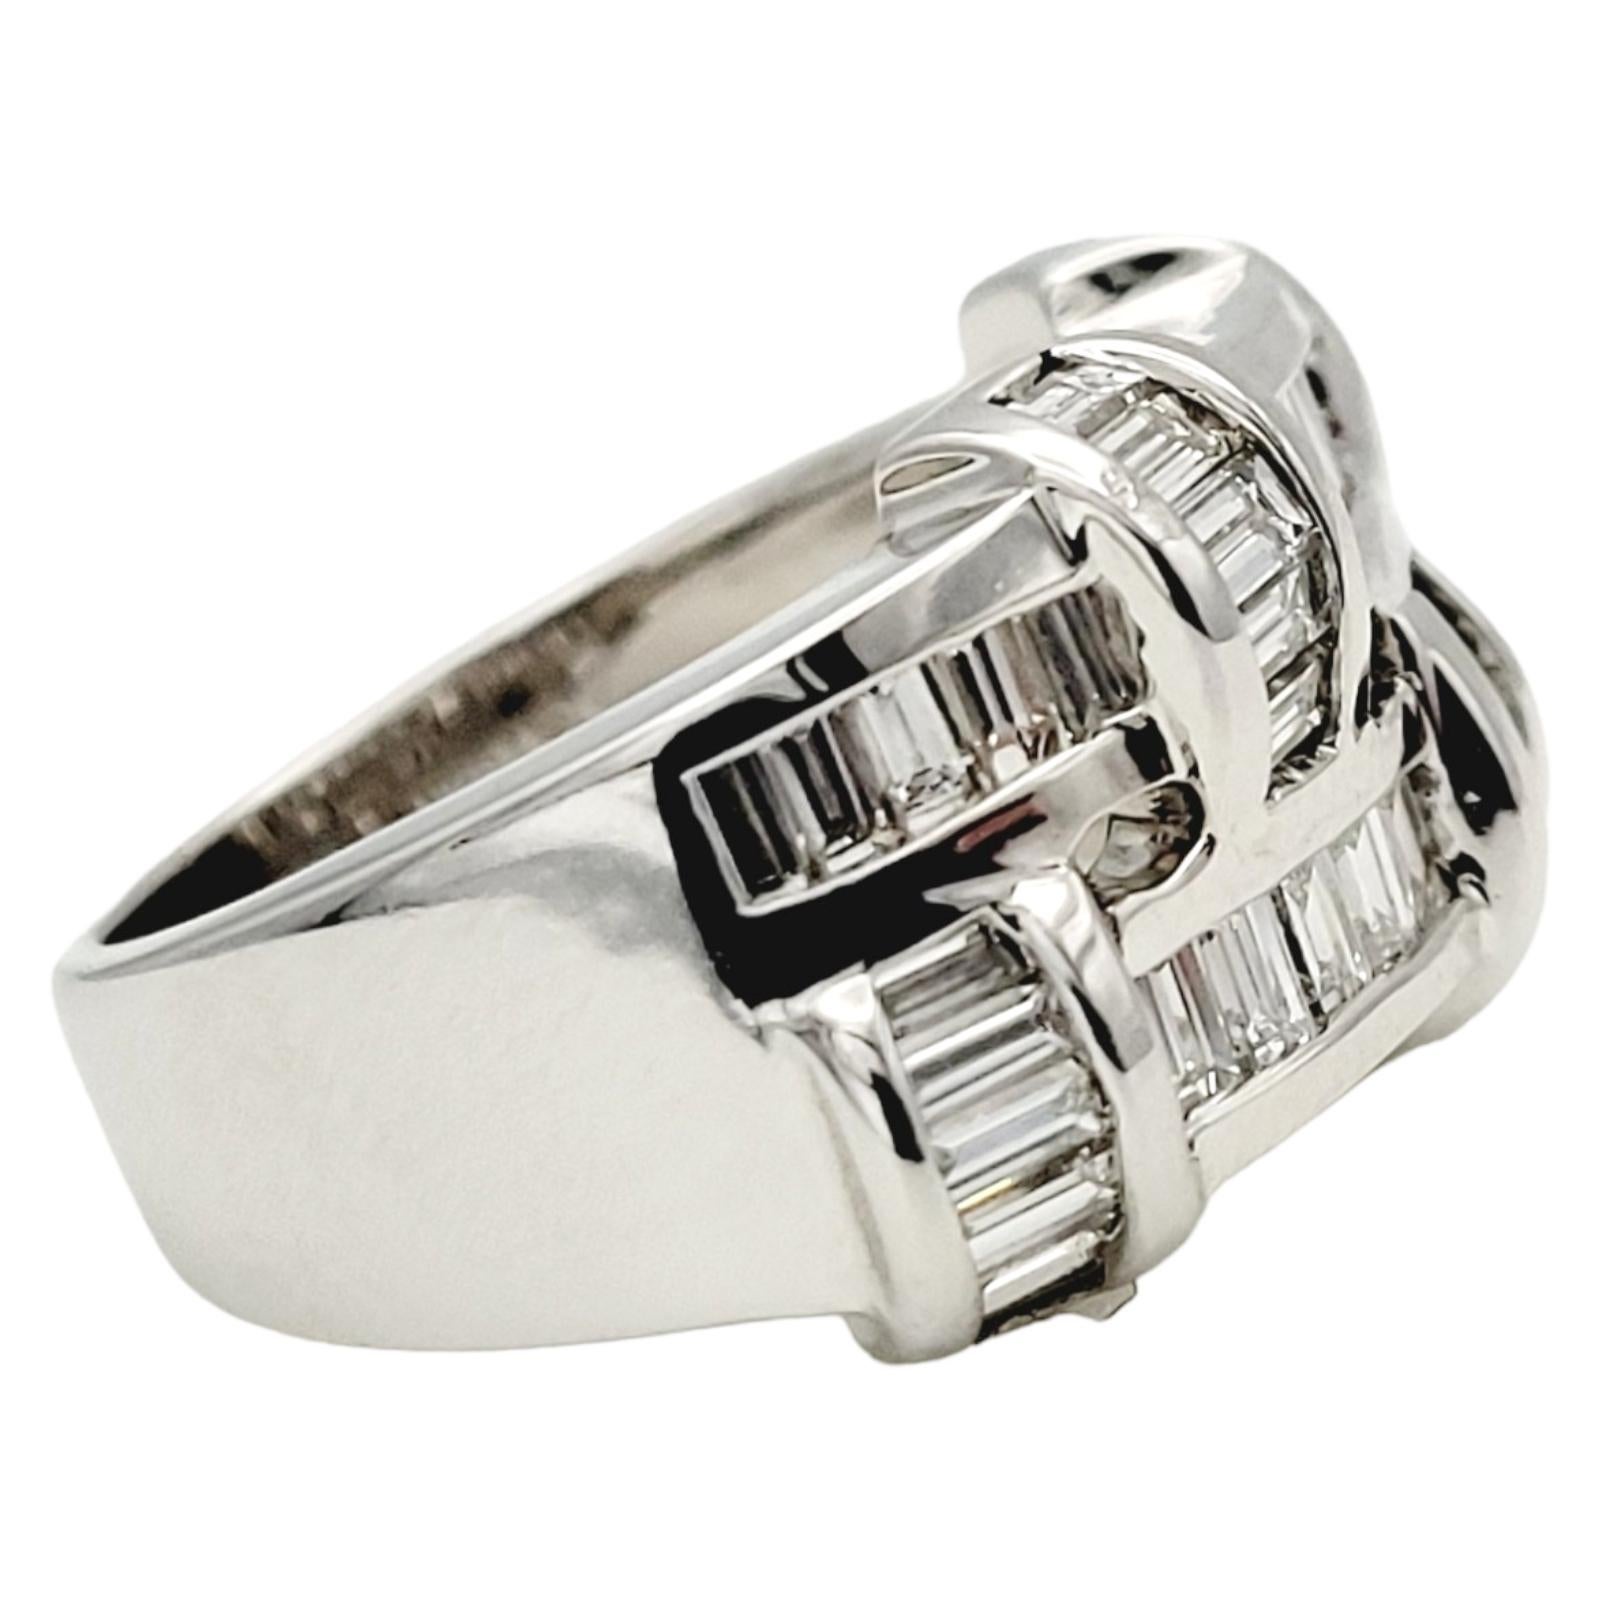 Ring Size 5.5 

Shown here is a striking contemporary piece bursting with sparkle. Crafted in luxurious 18 karat white gold, this multi-row baguette diamond ring has a sleek and sophisticated design that shimmers from all angles, absolutely lighting